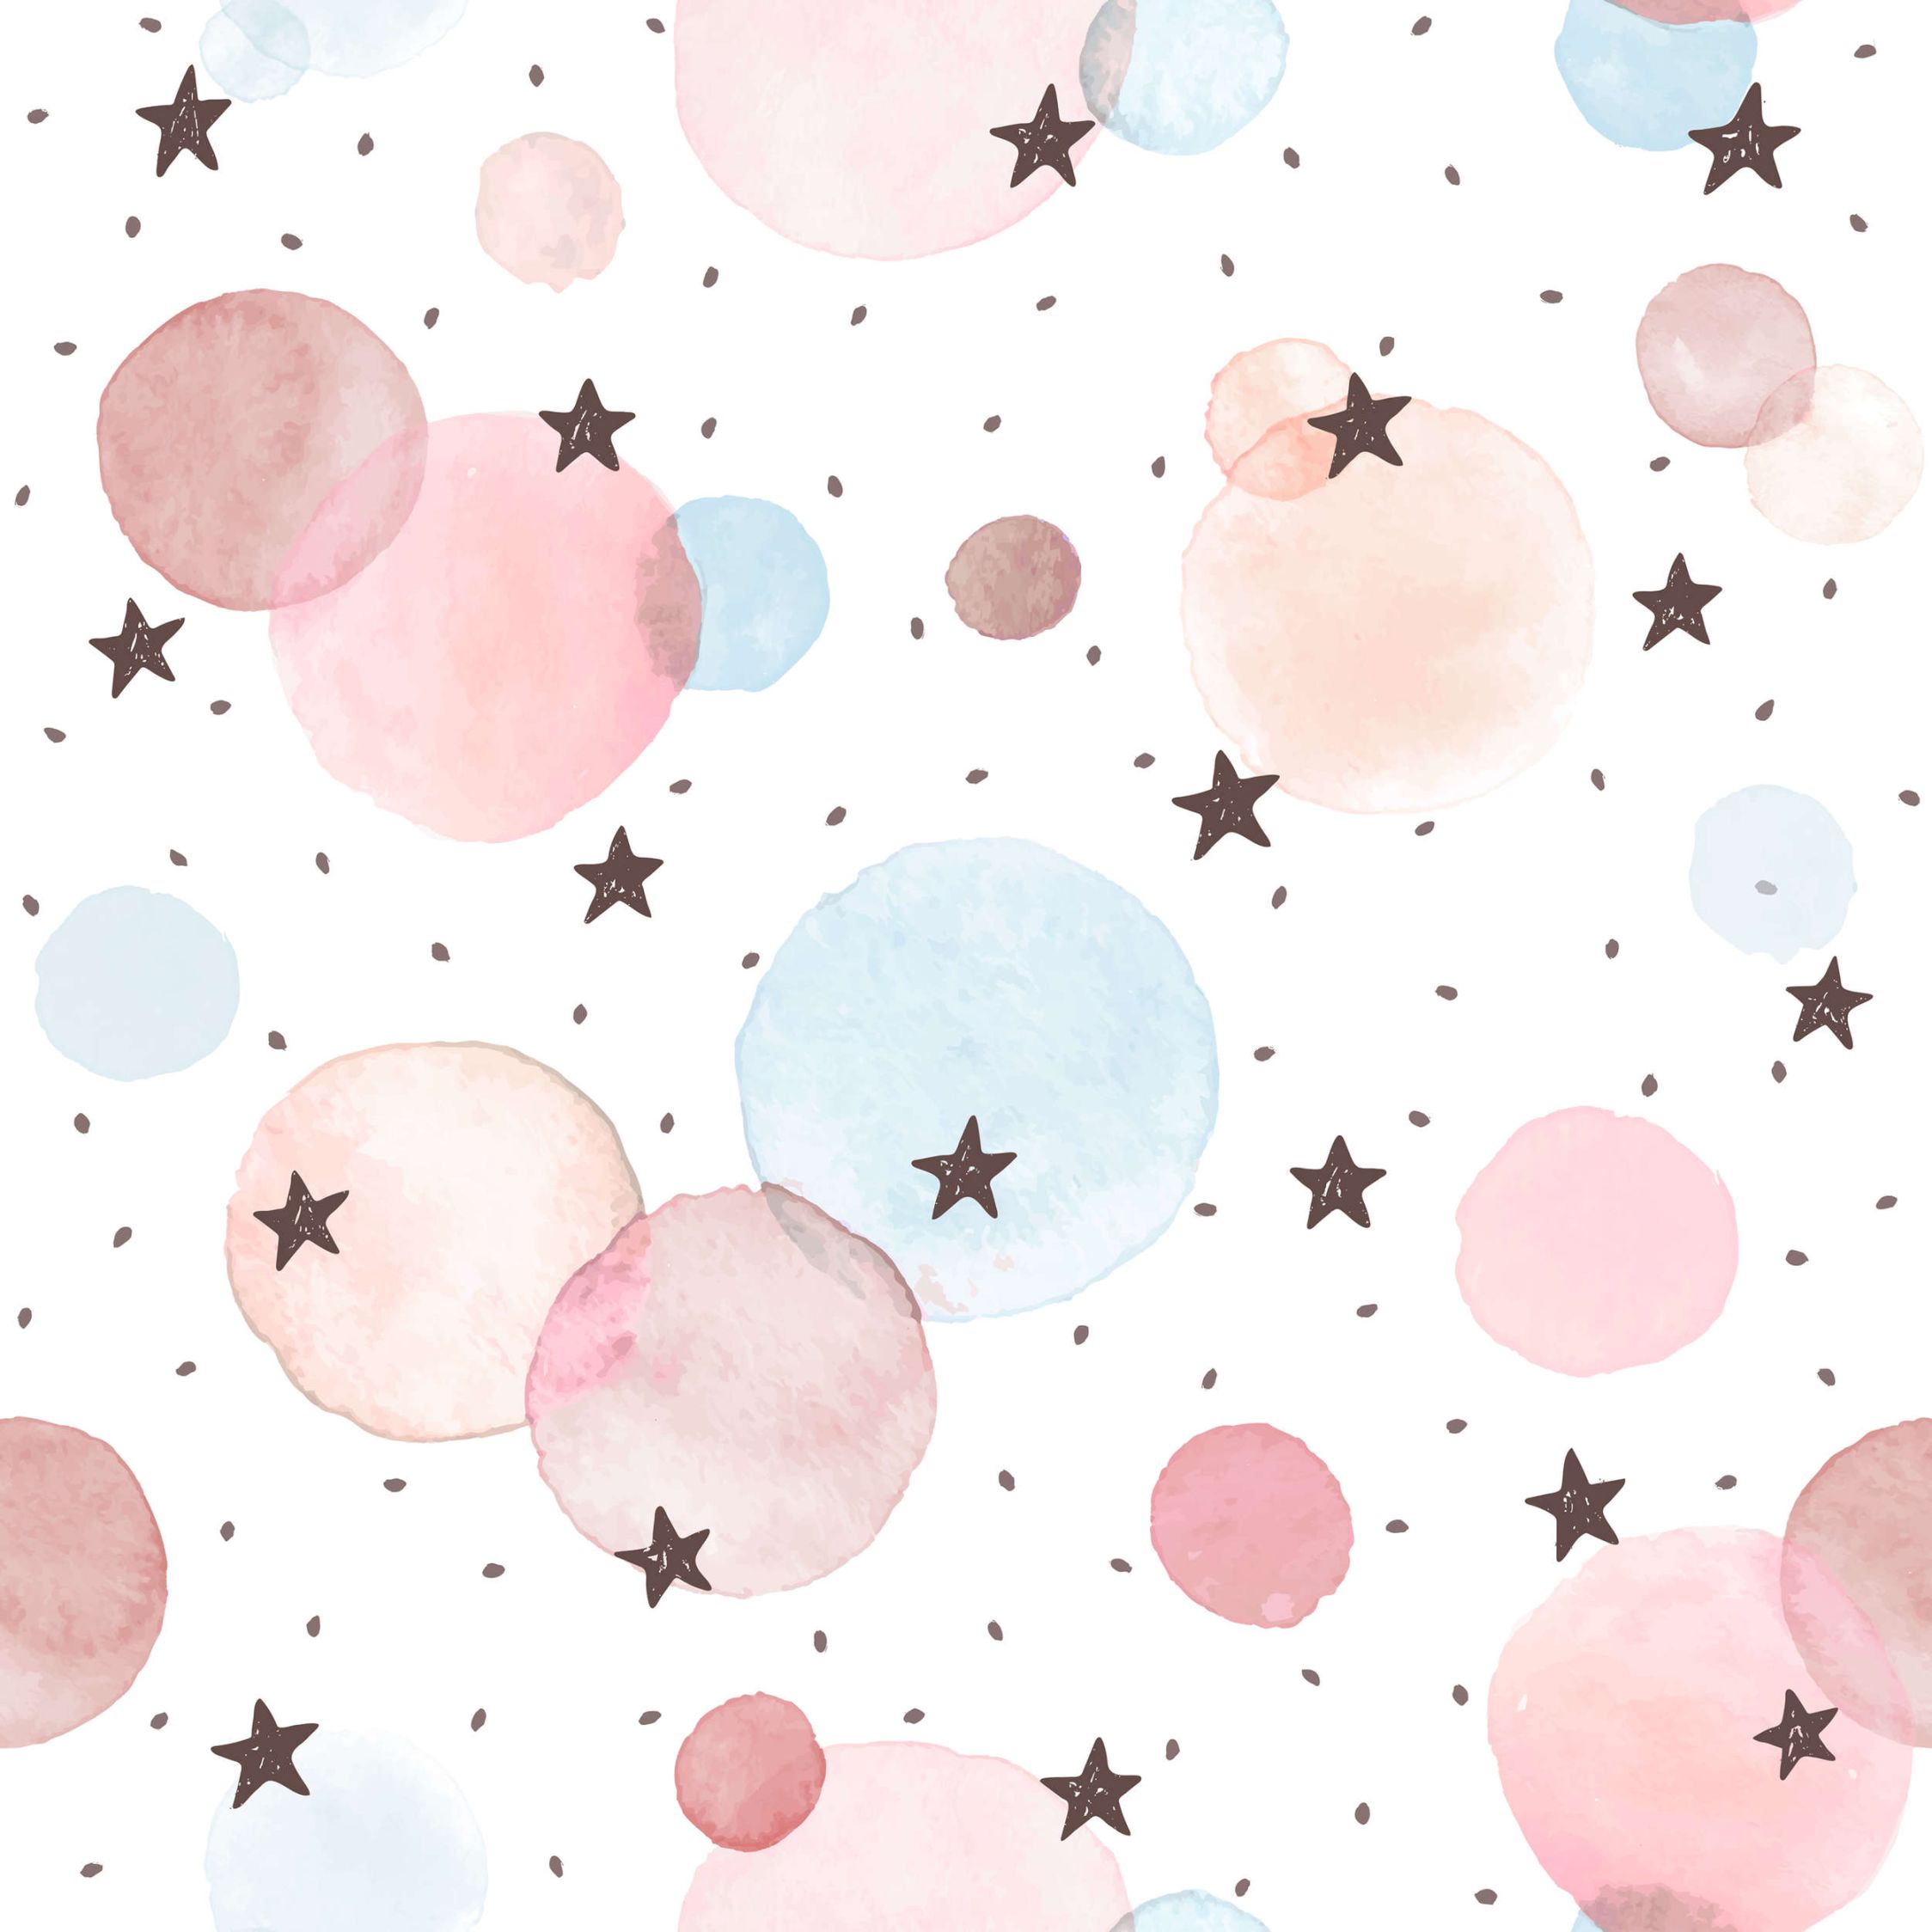             Nursery mural with stars, dots and circles - Textured non-woven
        